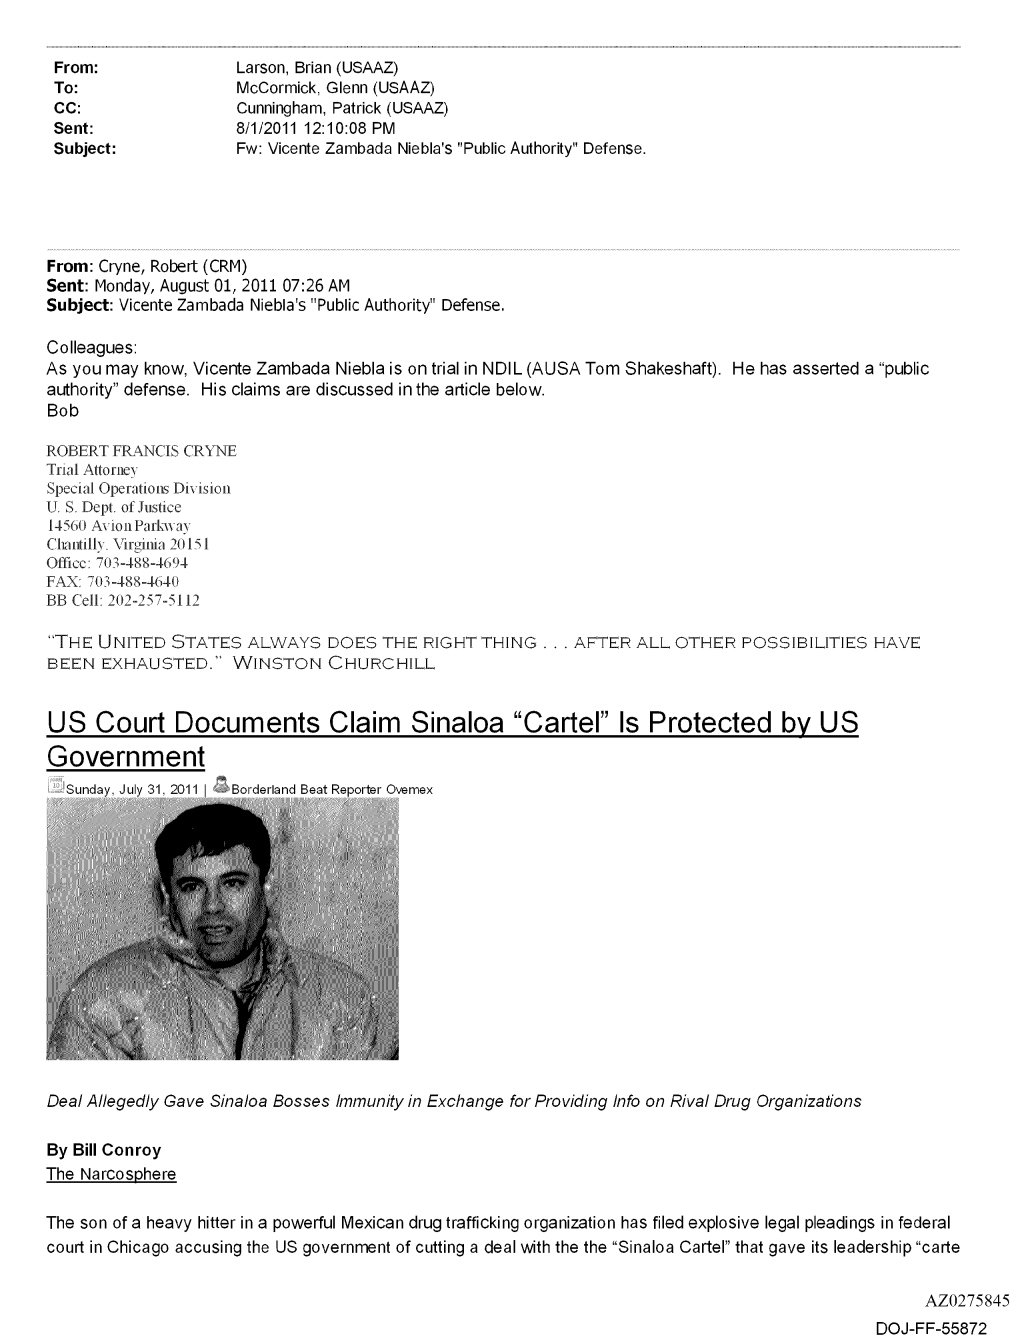 US Court Documents Claim Sinaloa "Cartel" Is Protected by US Government Sunday